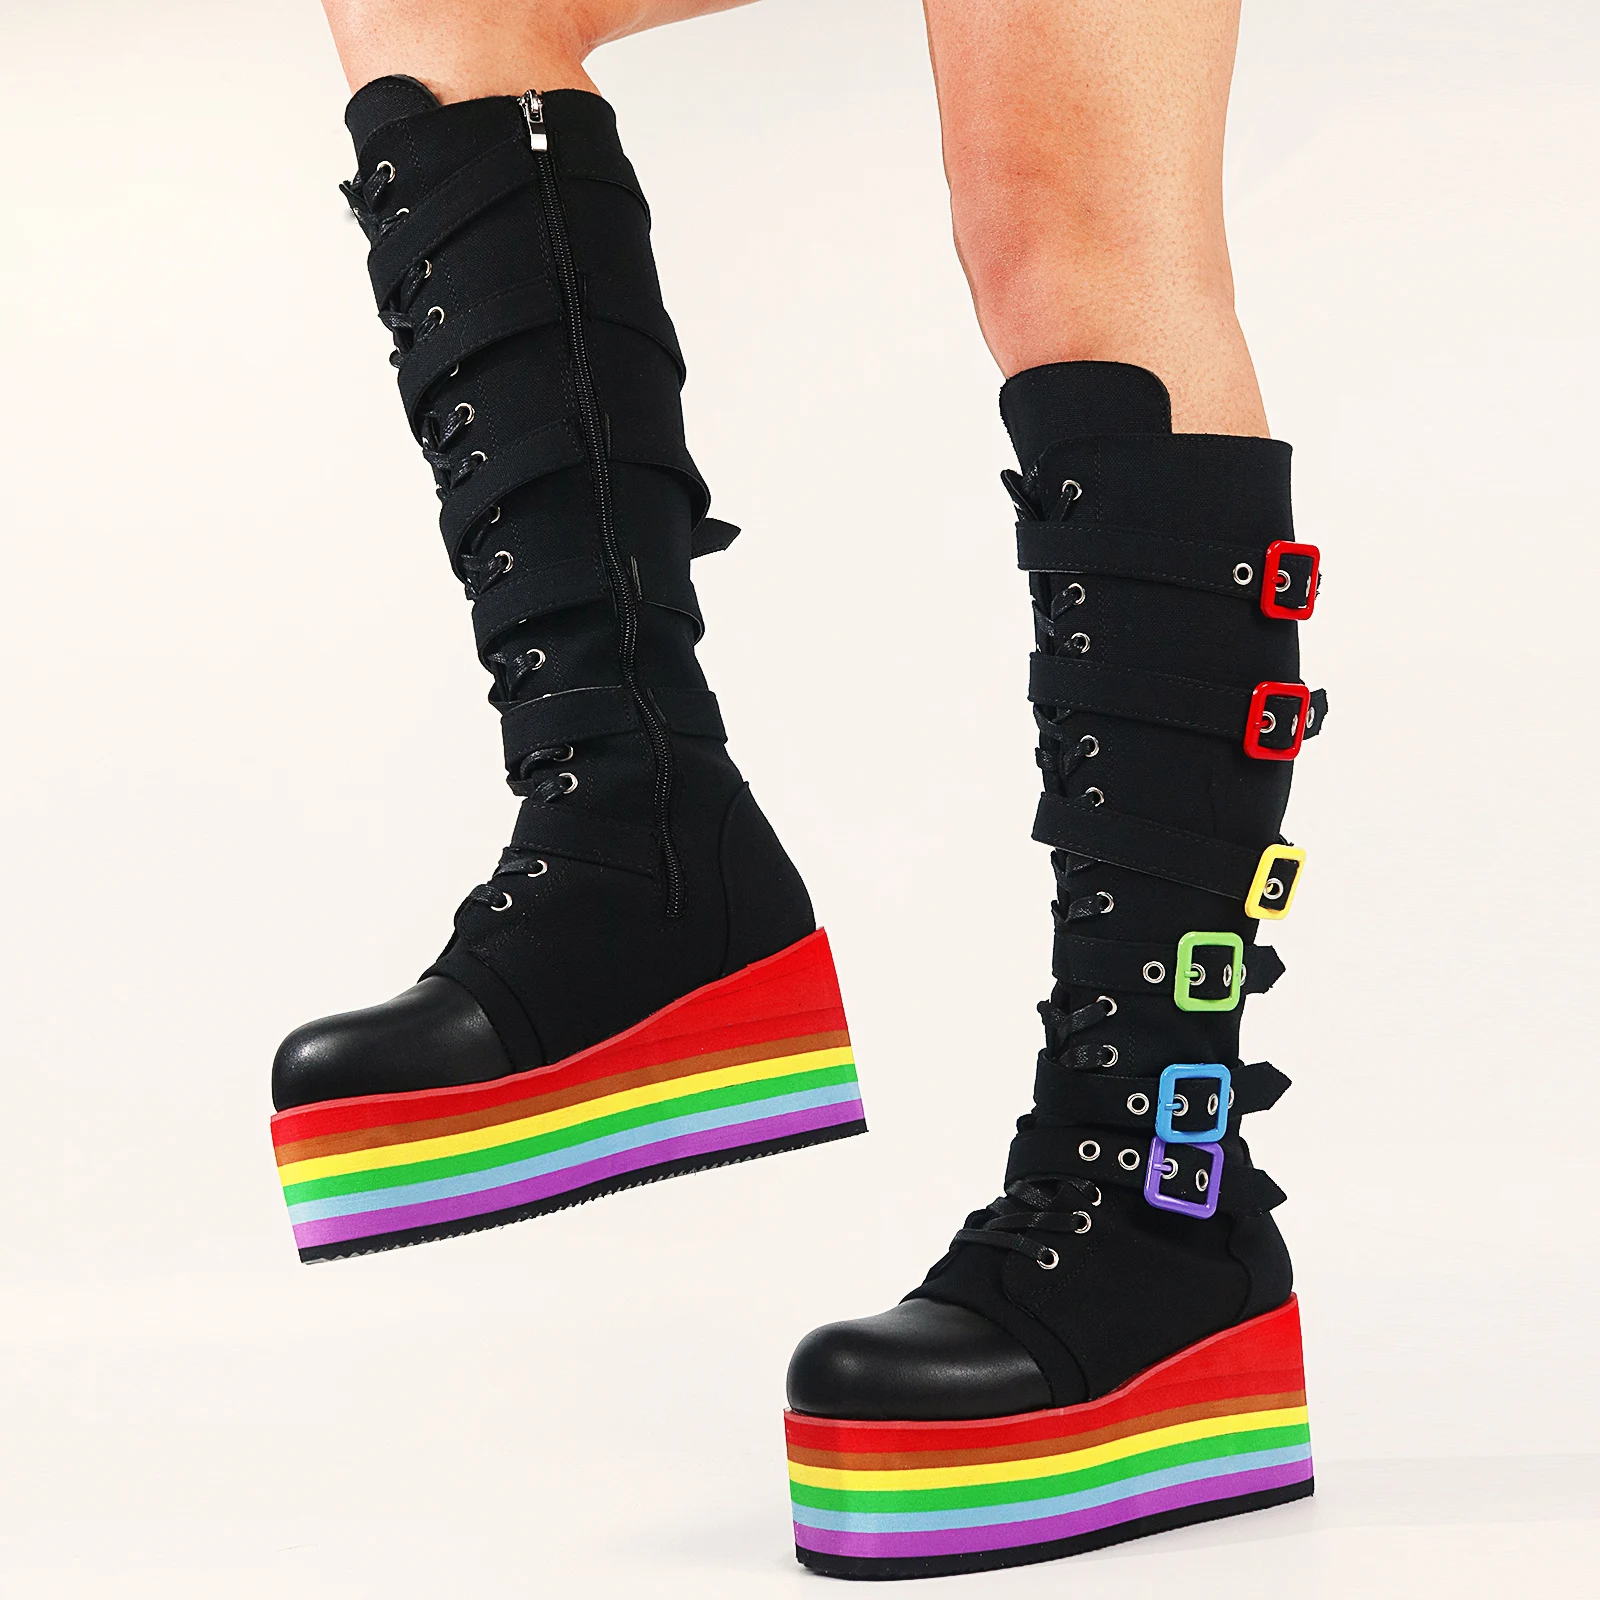 GIGIFOX Brand Big Size 43 Fashion Gothic Rianbow Platform Buckles Zipper Colorful Great Quality Motorcycle Boots Woman Shoes